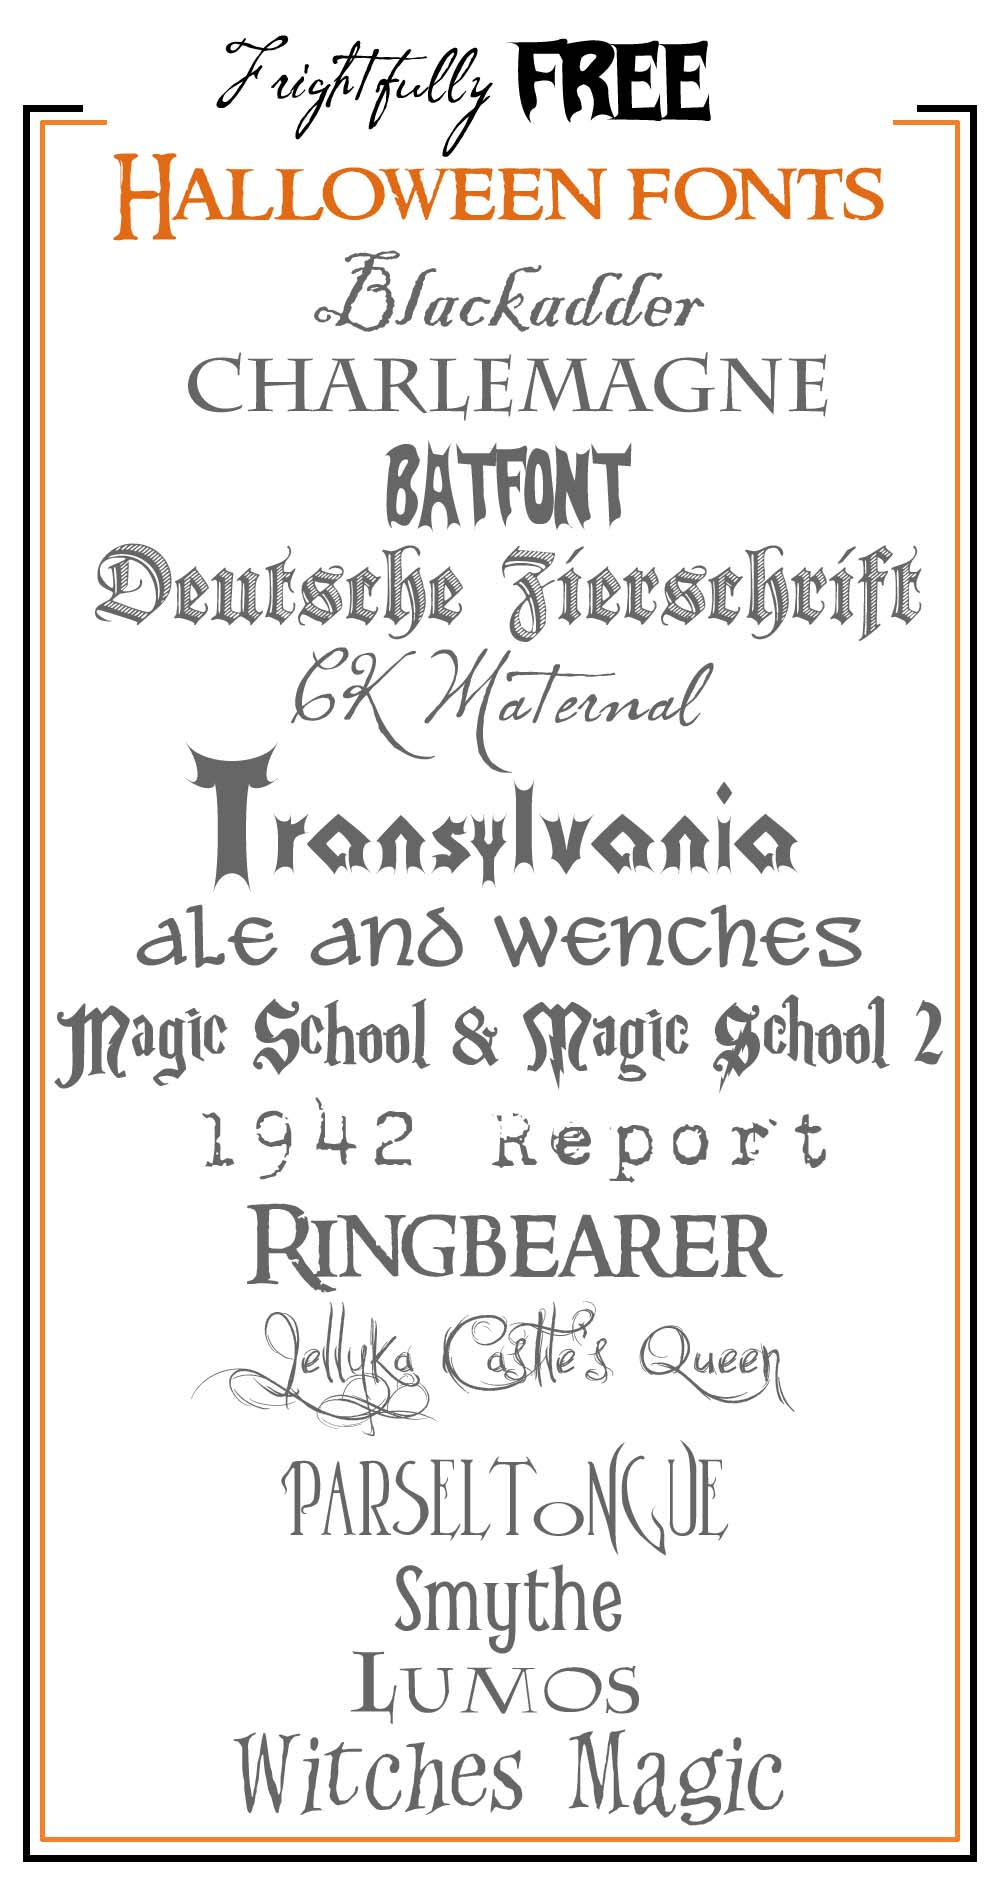 Frightfully Free Halloween Fonts - Free Printable Fonts